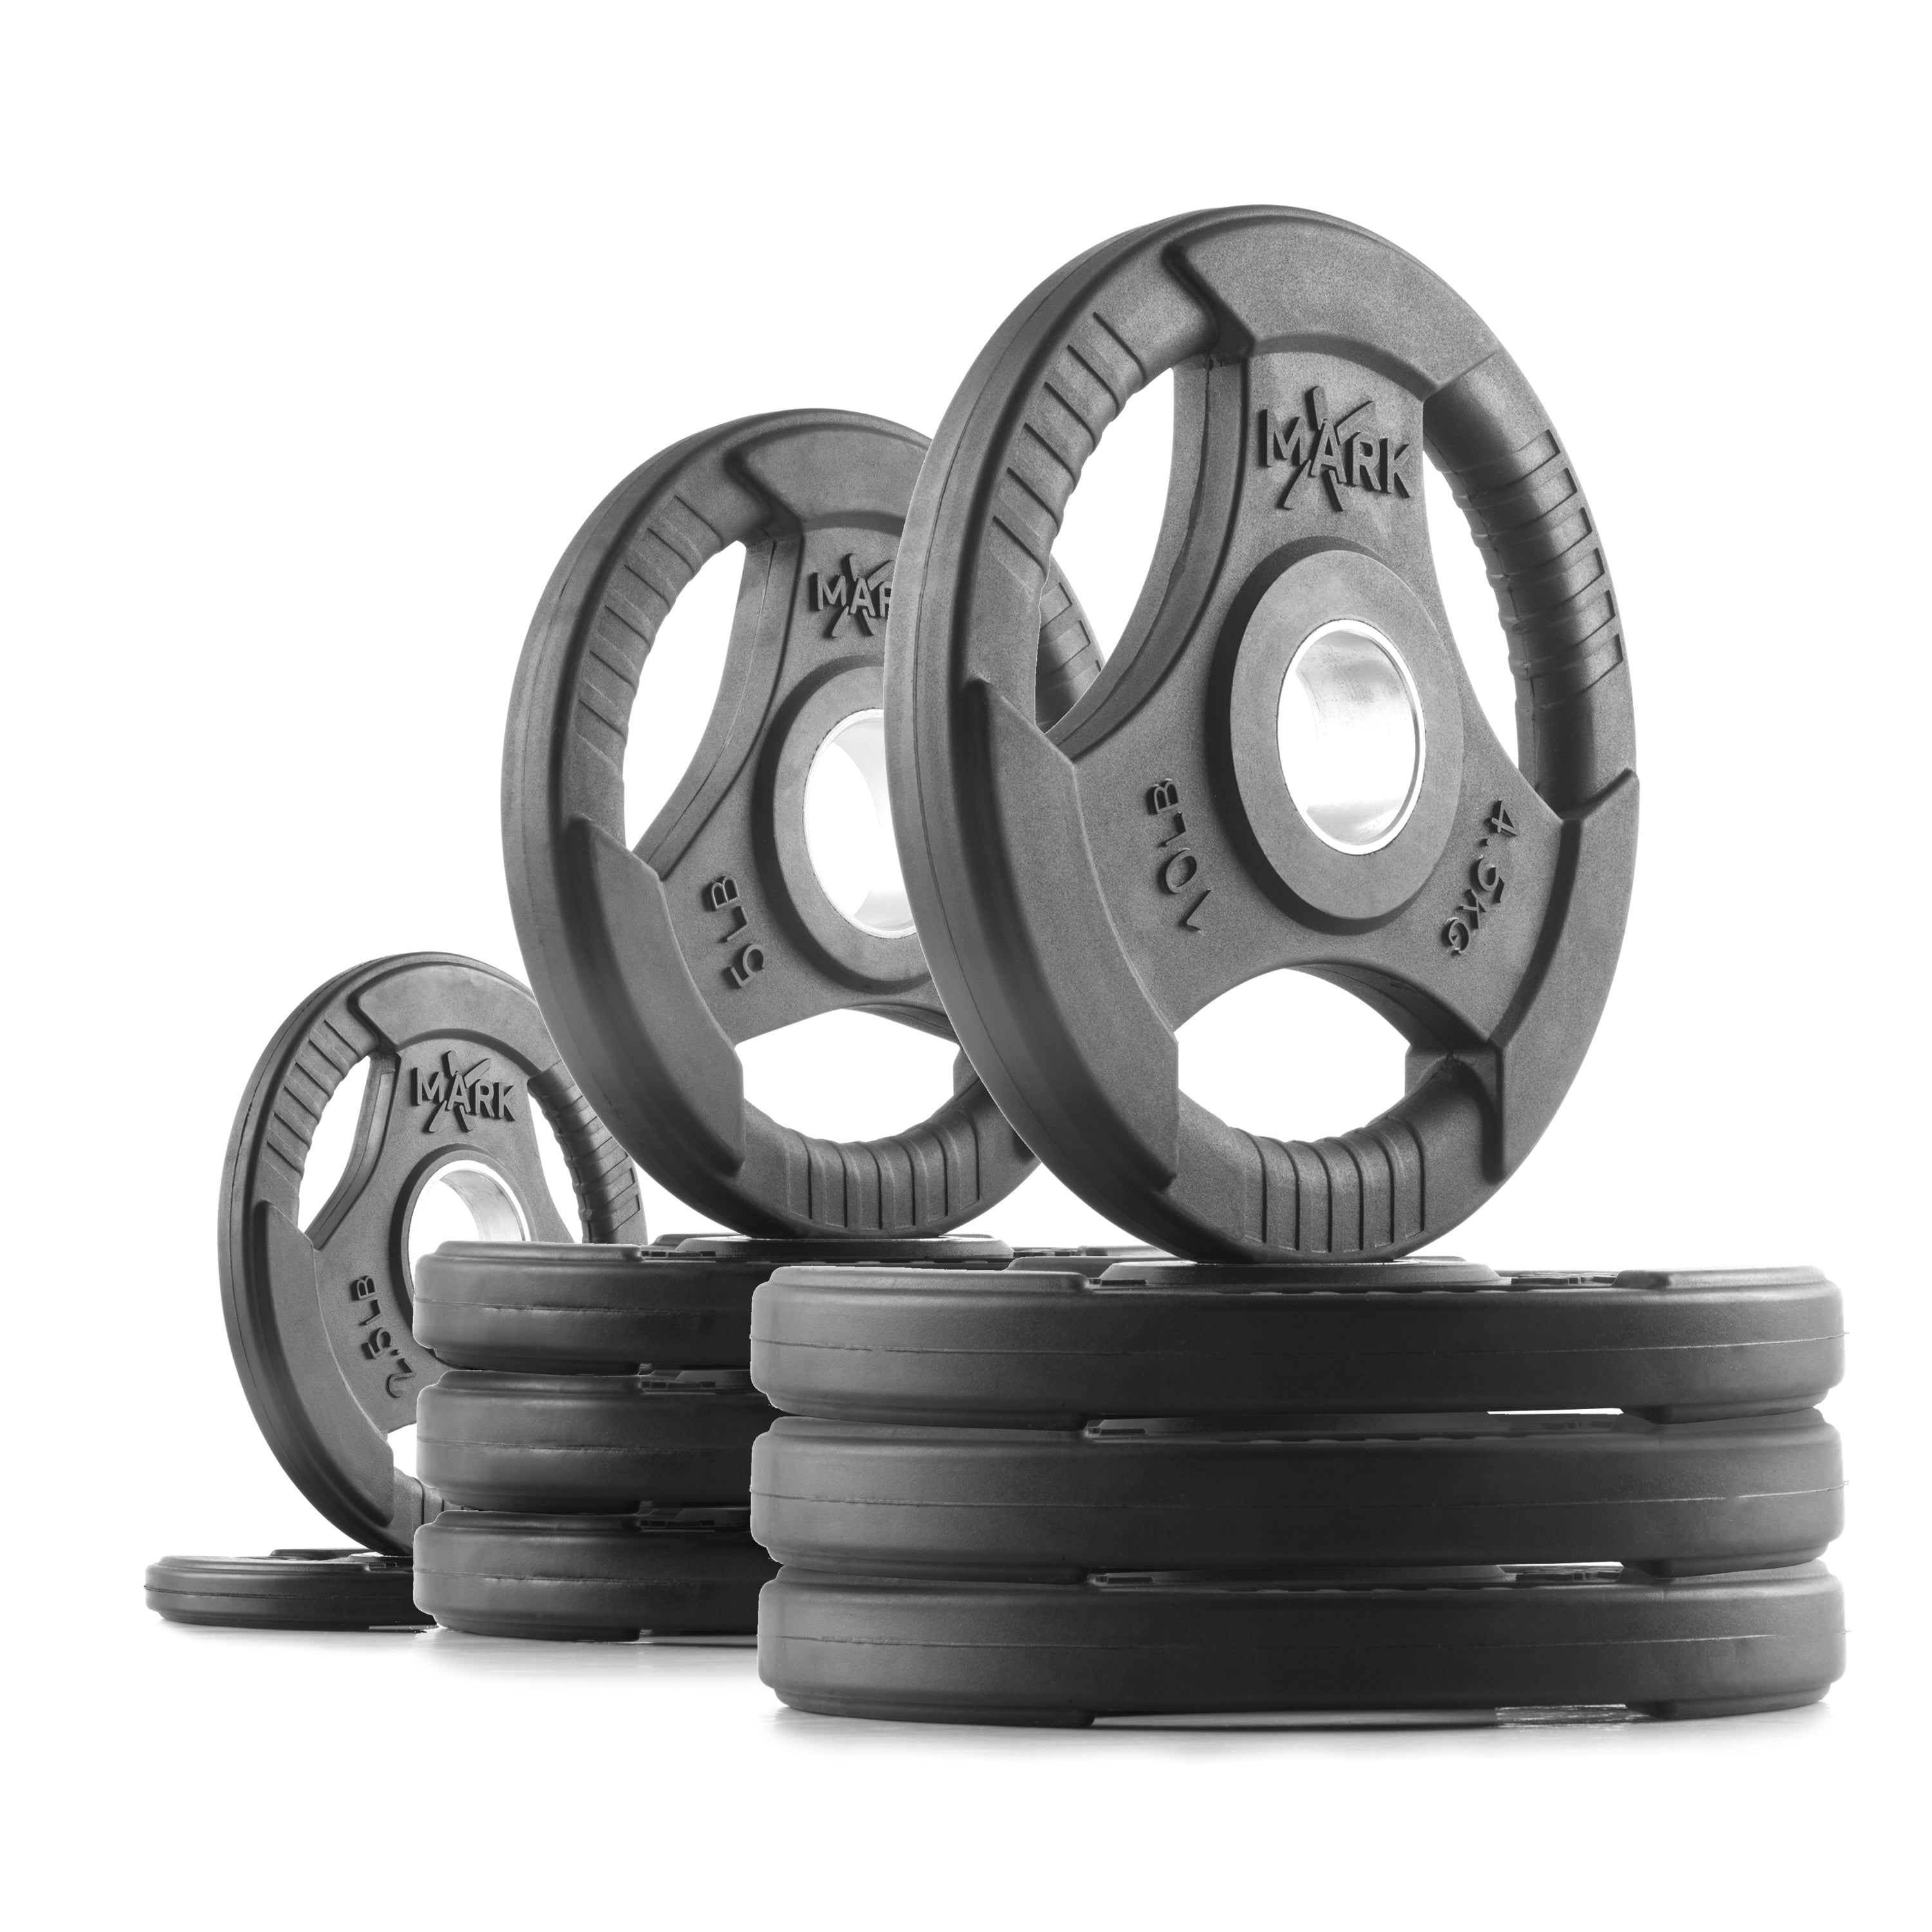 Tri Grip 65 lb Set Olympic Weights